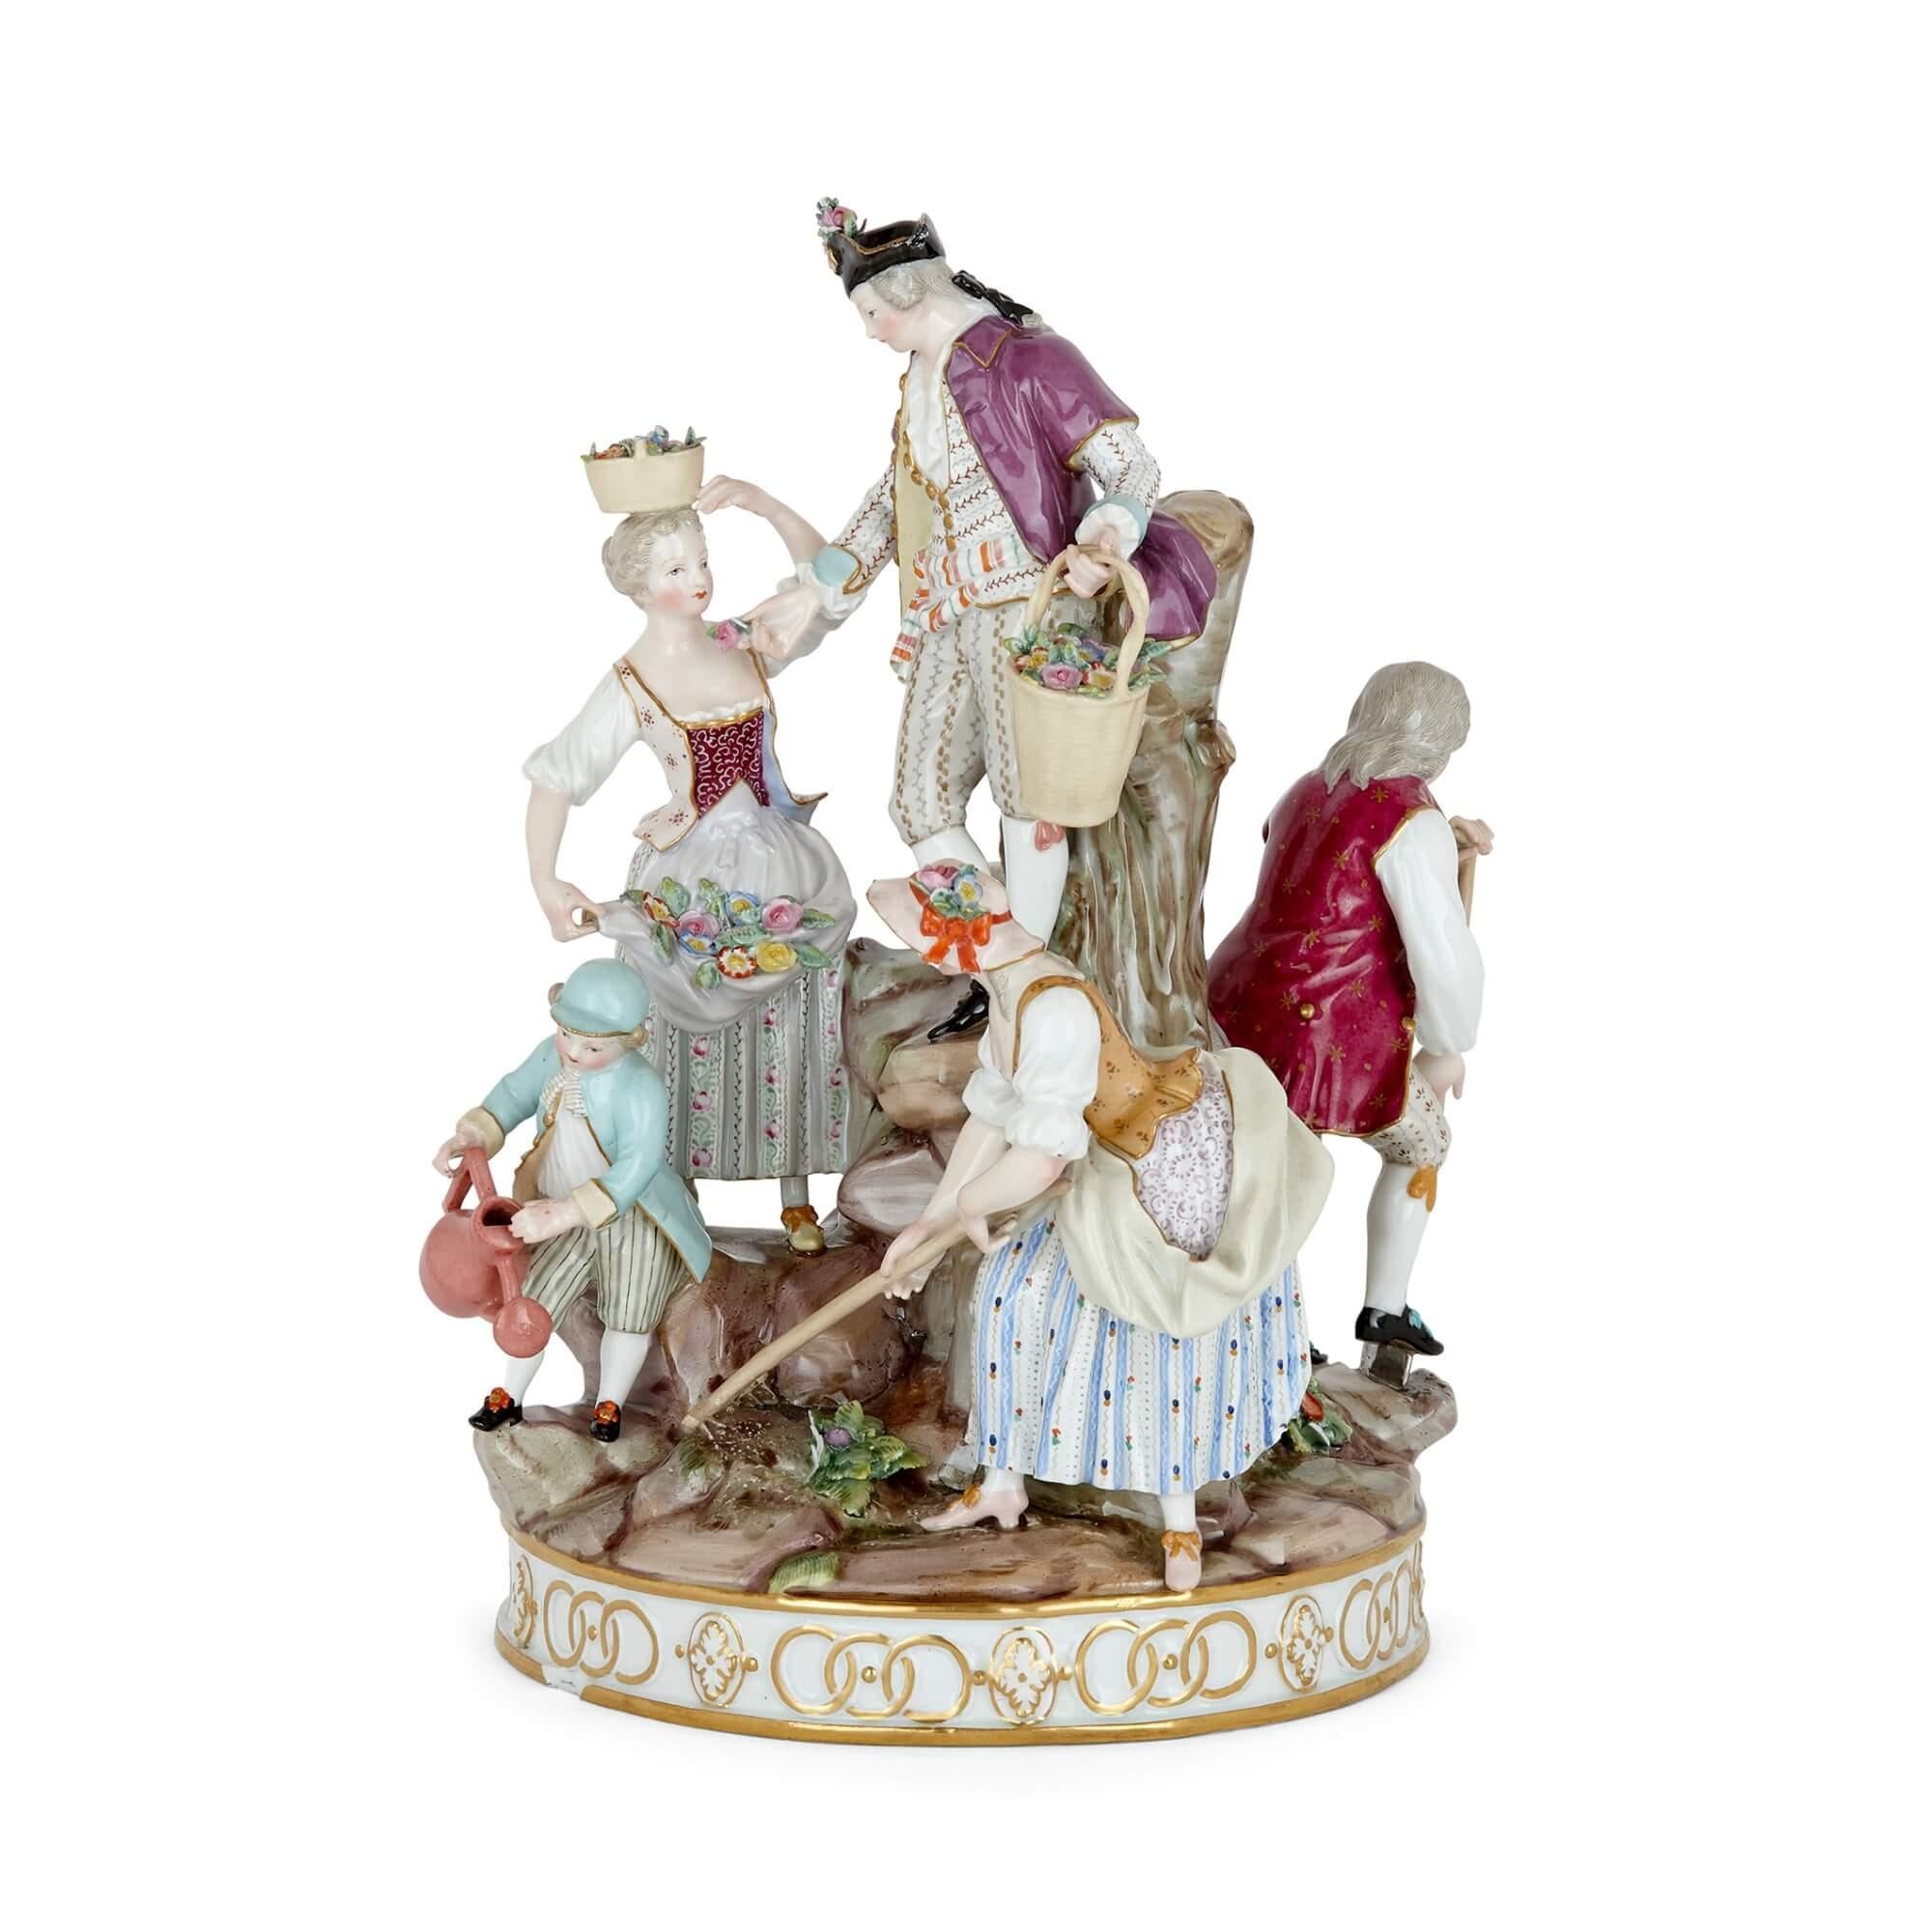 Taken from a model of 1772 by M.C. Avier and J.C. Schönheit, this charming porcelain group by the Meissen manufactory depicts a group of five figures around a central rock mound, involved in various idyllic activities relating to gardening and rural